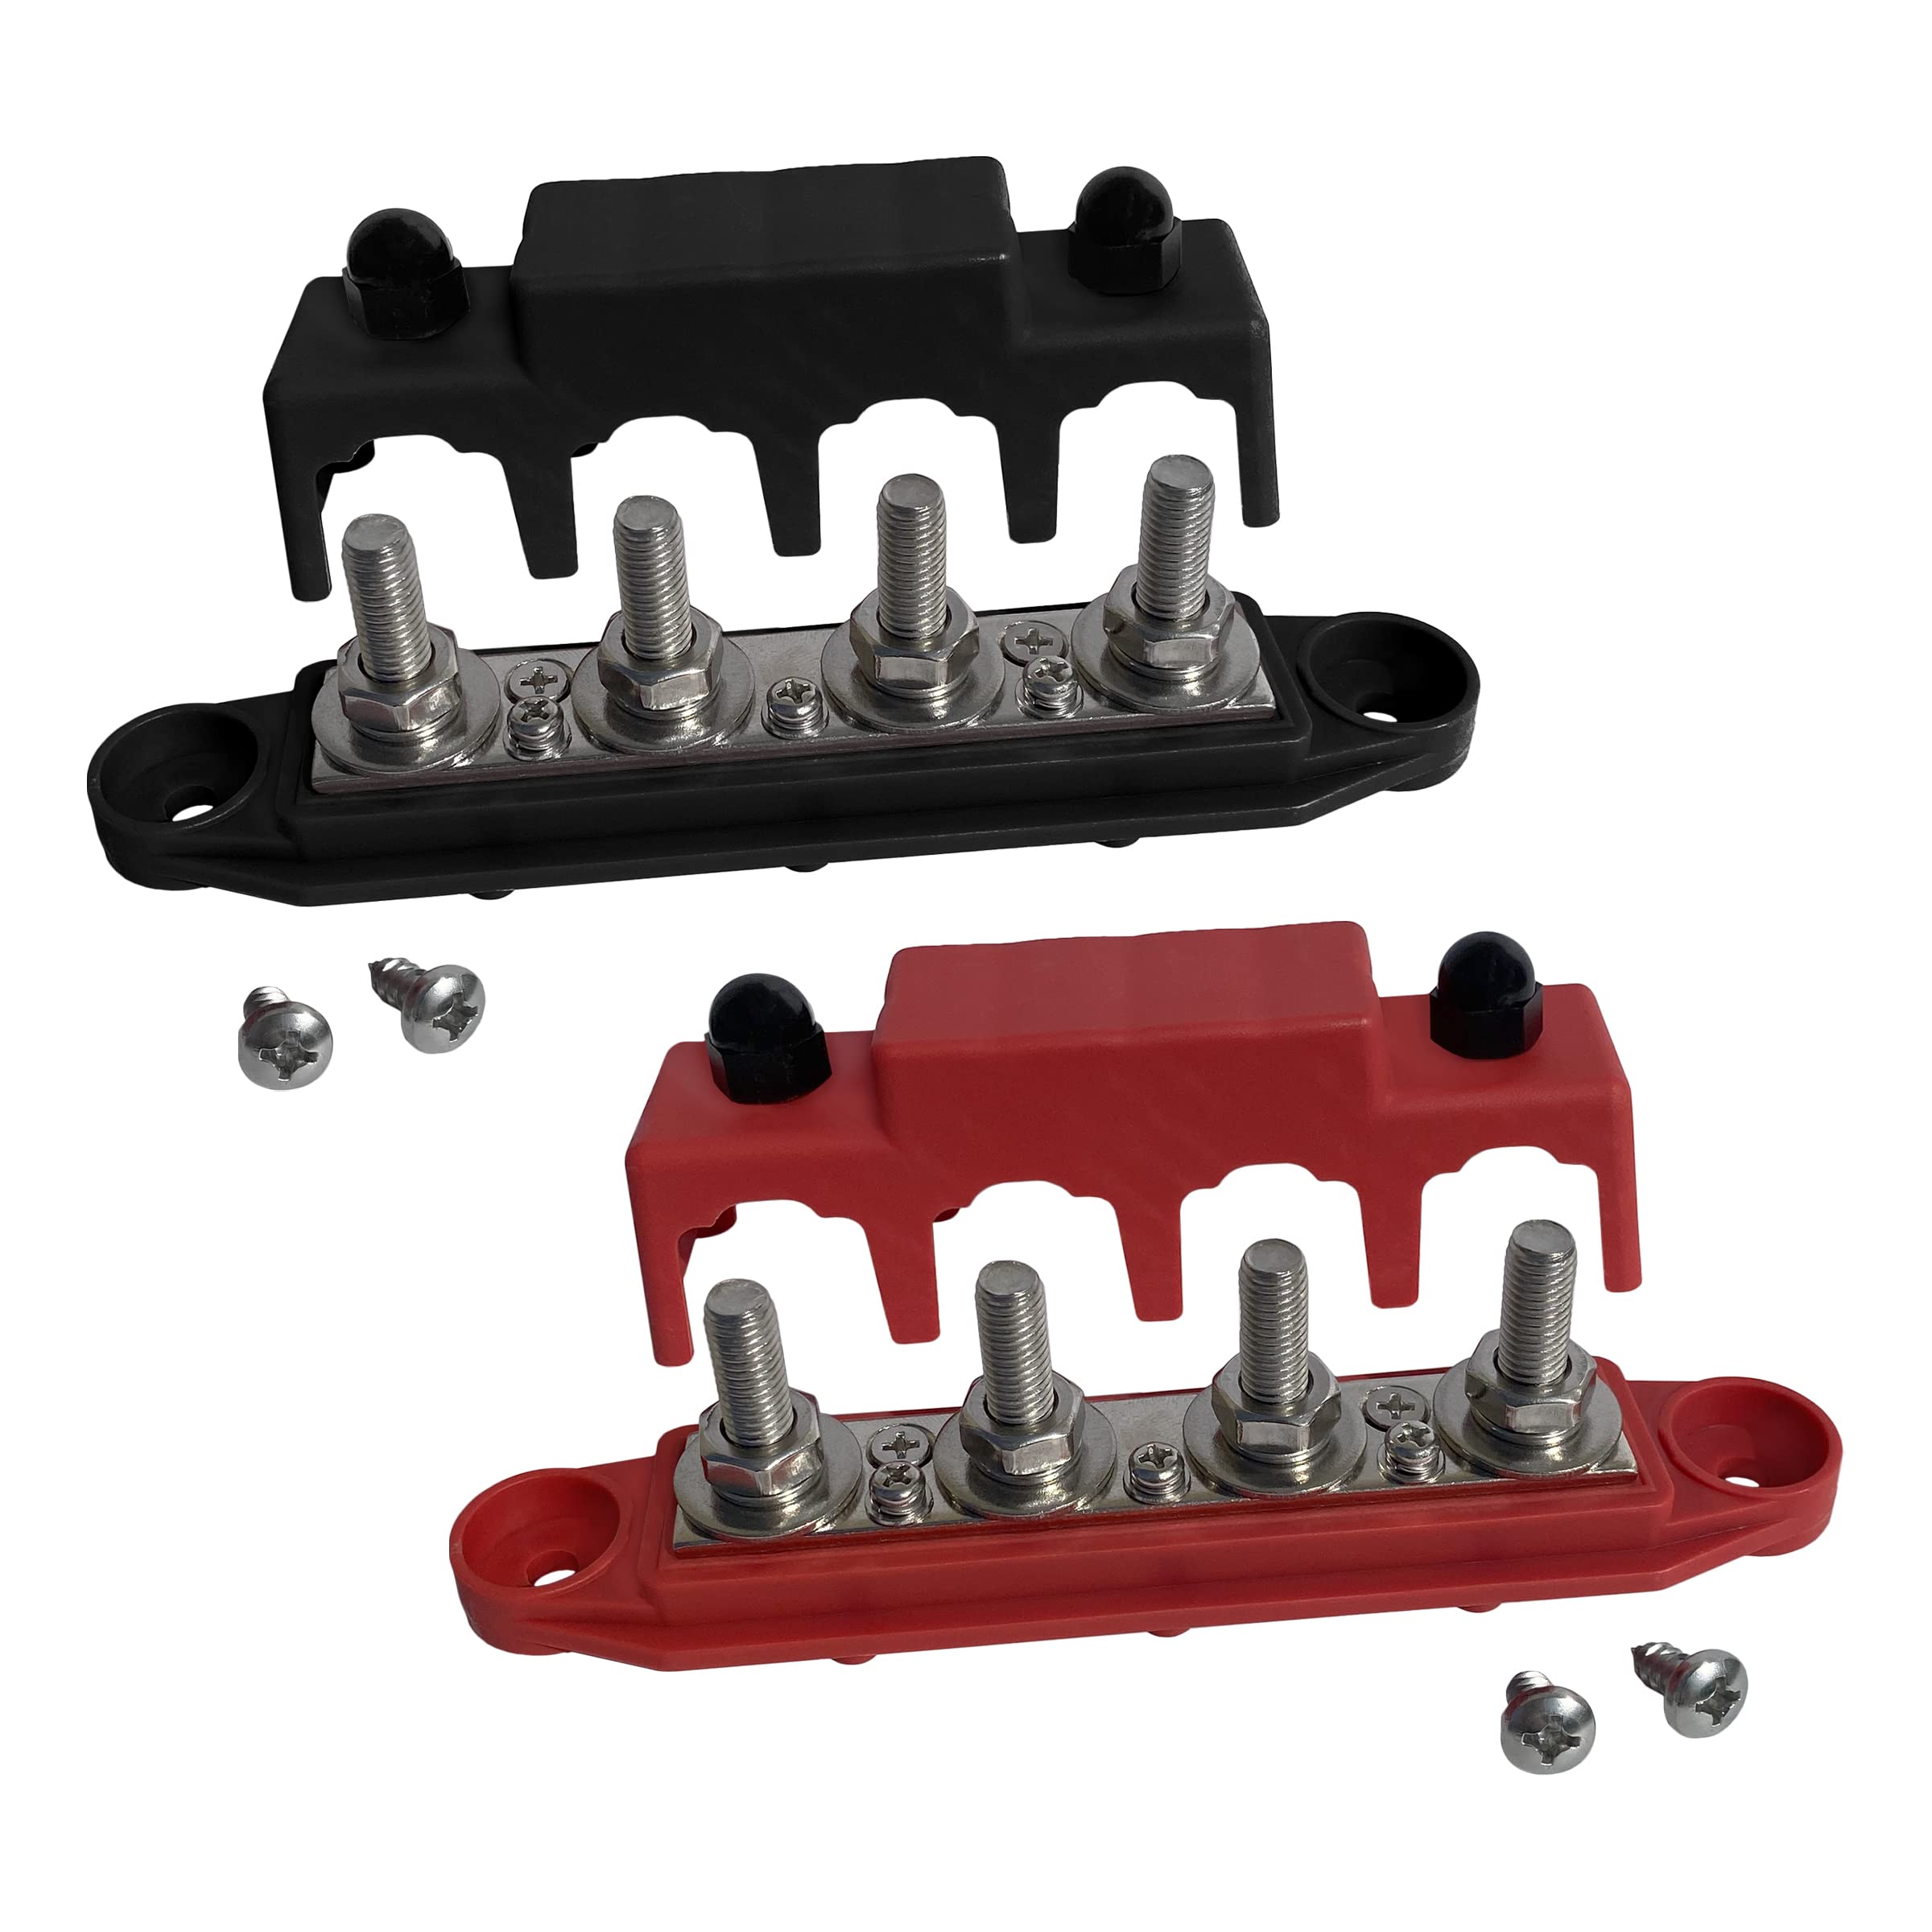 Post power distribution block busbar Pair with cover 250Amp rating